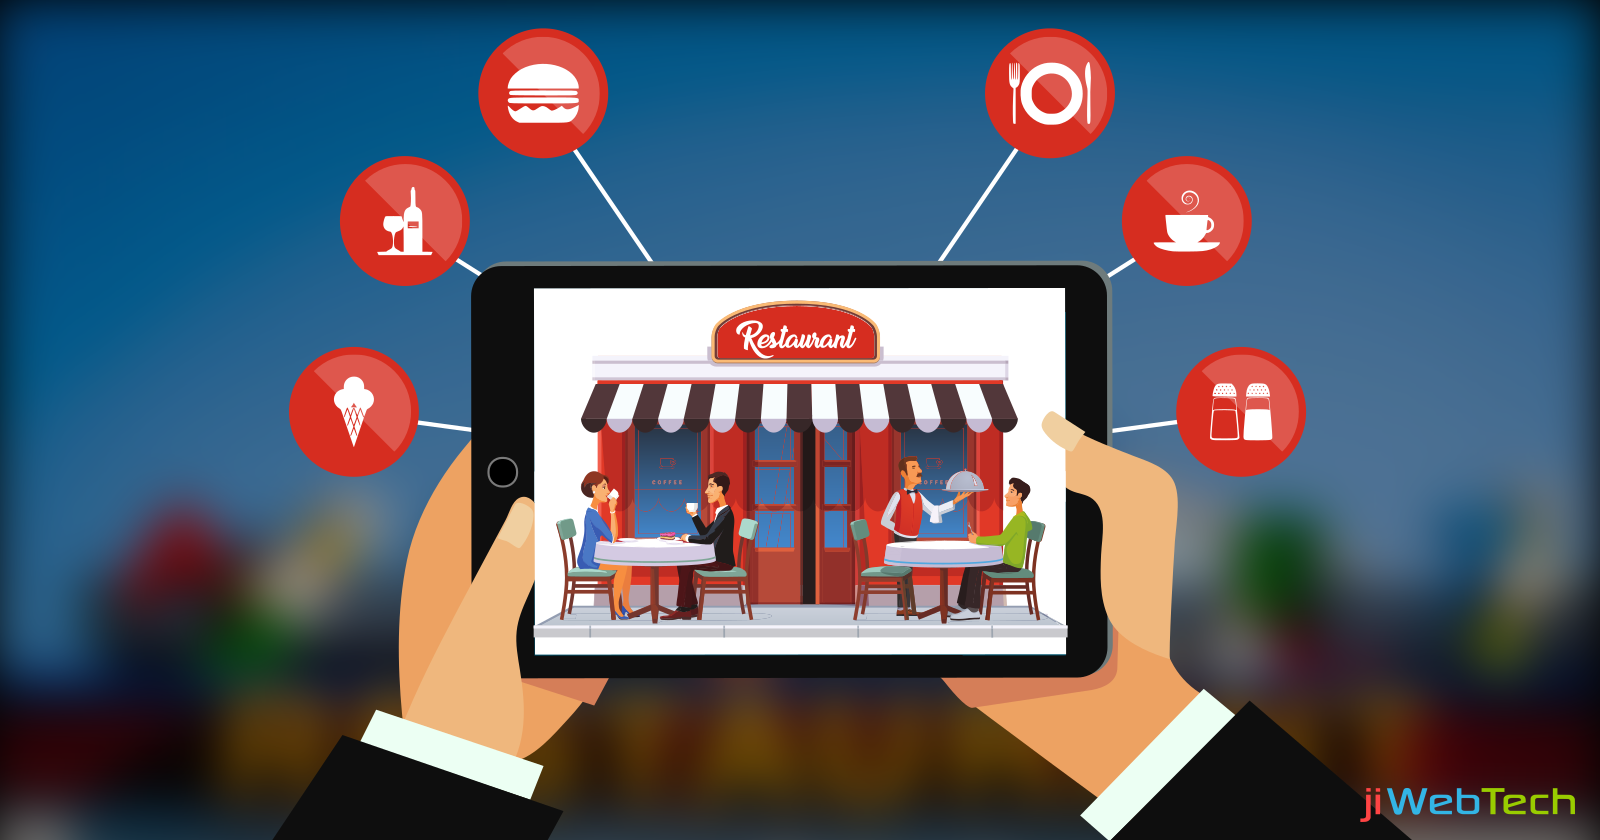 Double the Profit Using TECHNOLOGY in Your Food & Beverage Business